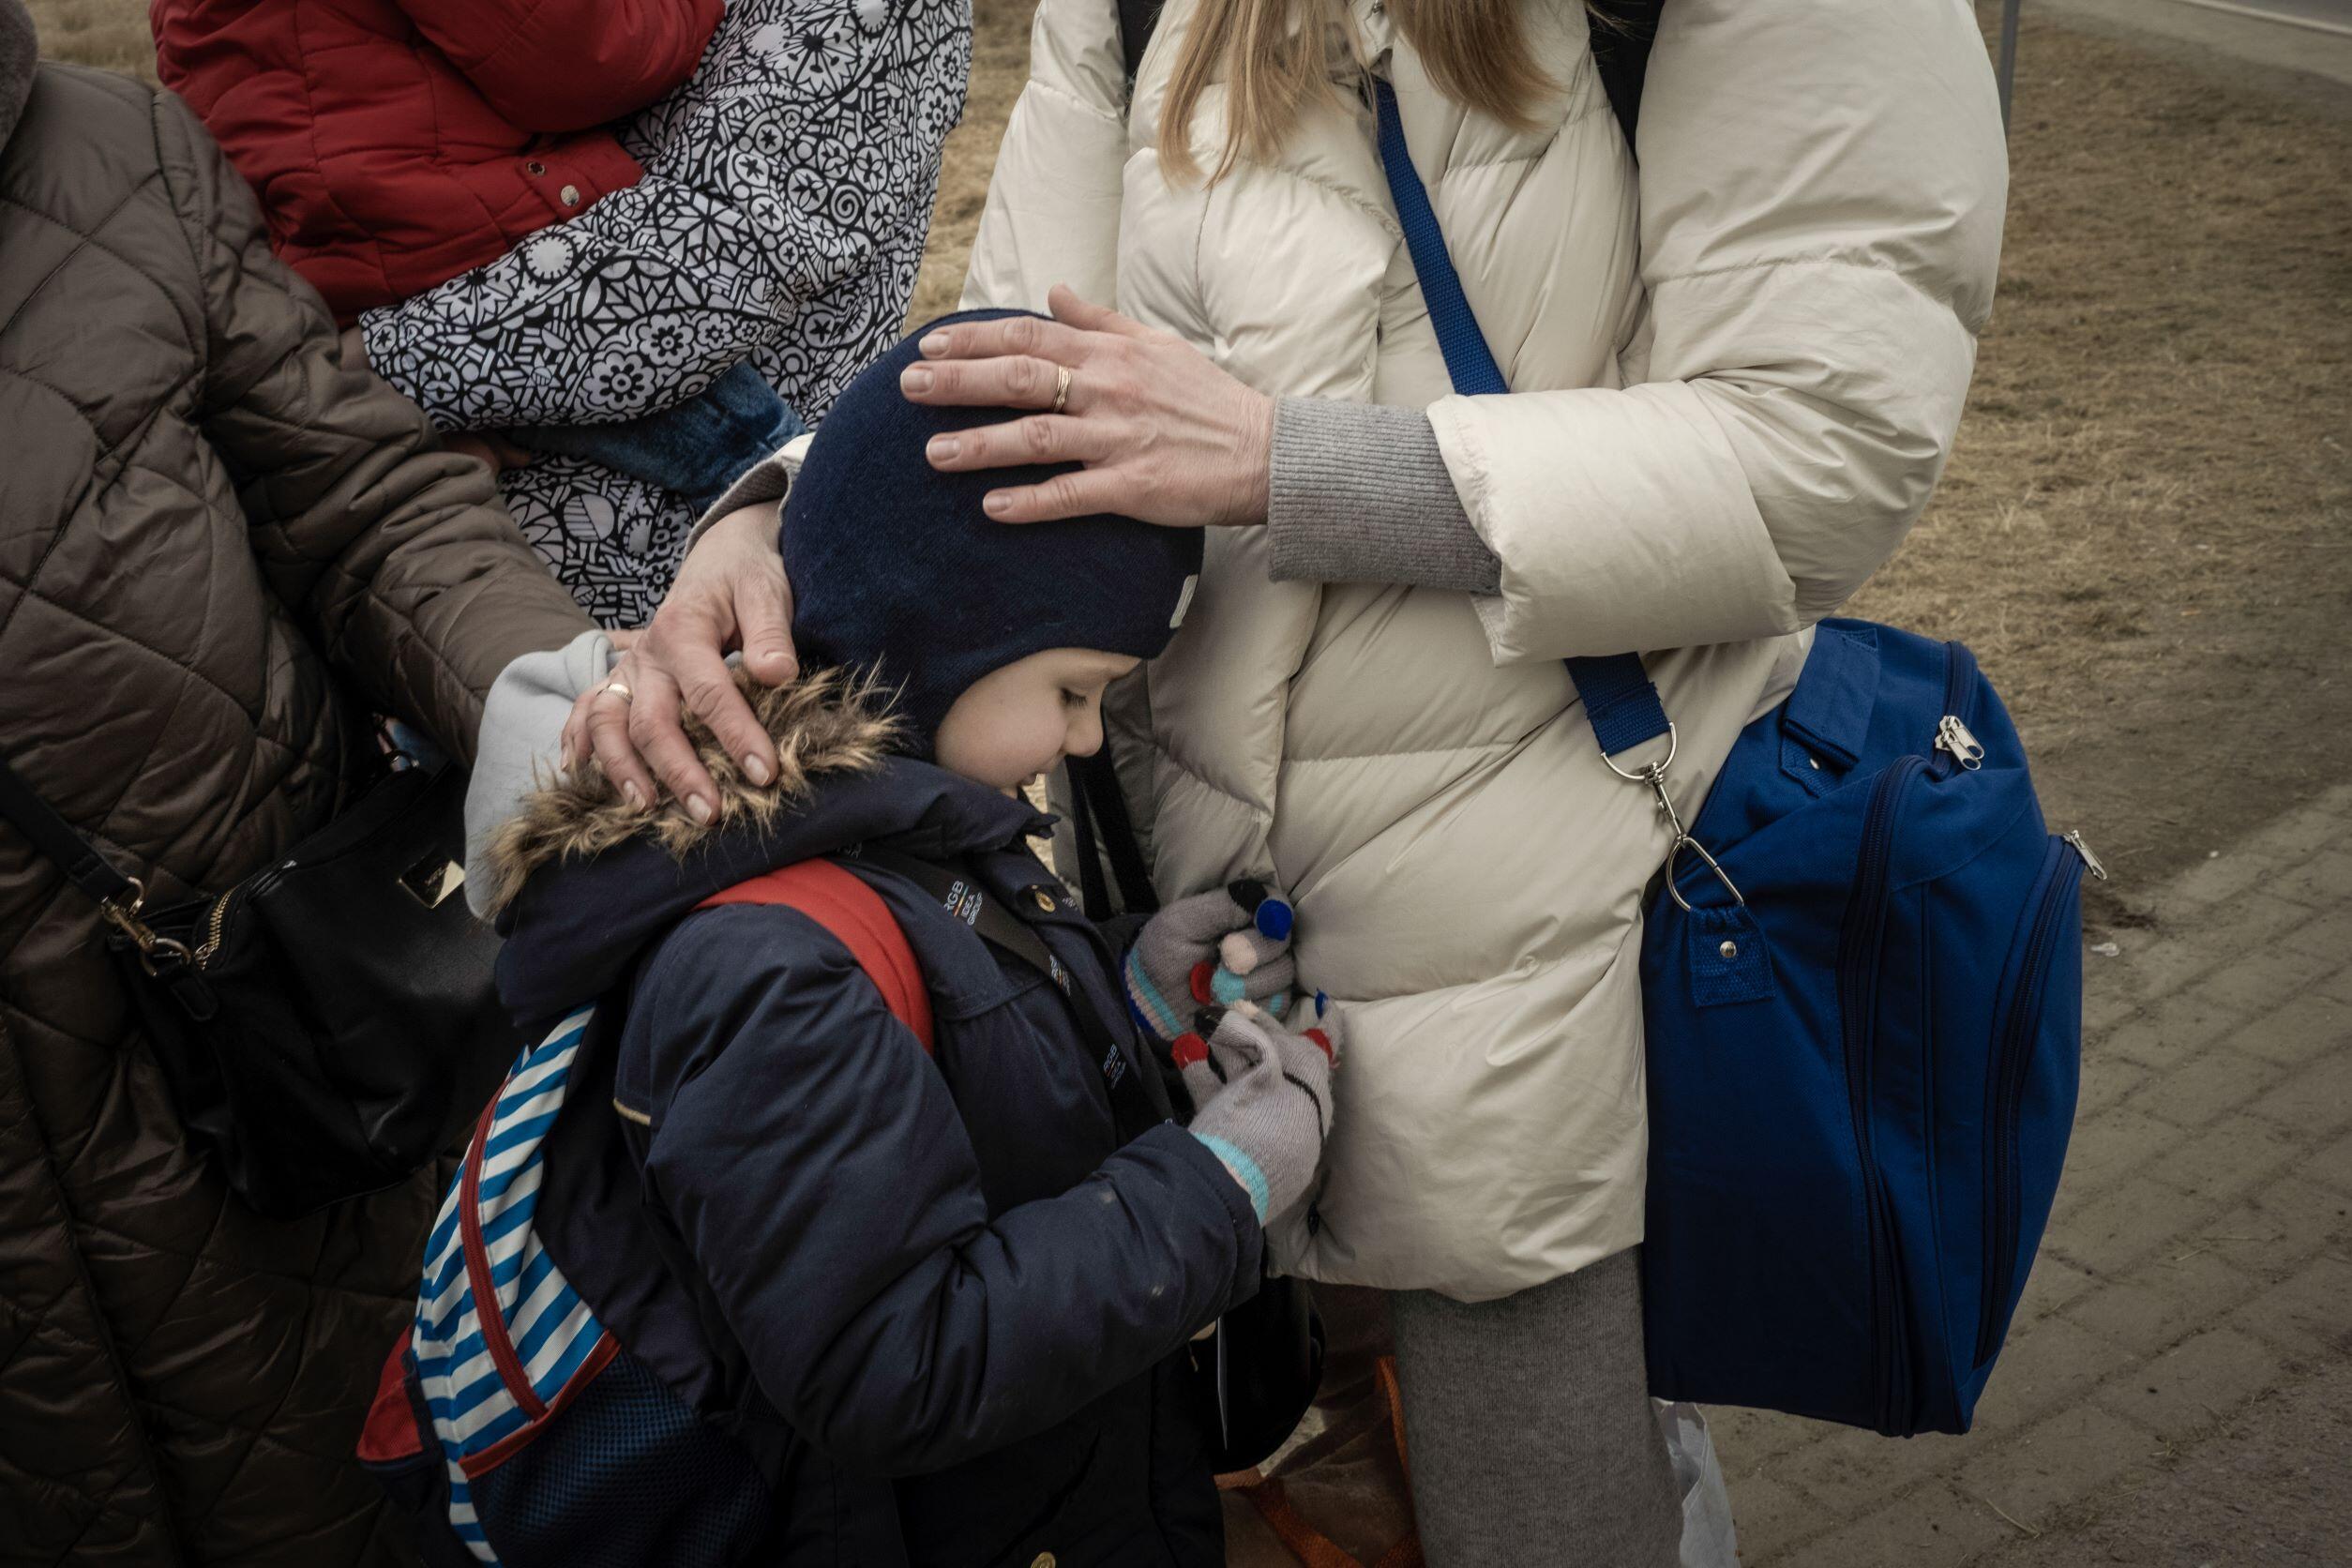 A refugee woman comforts her child